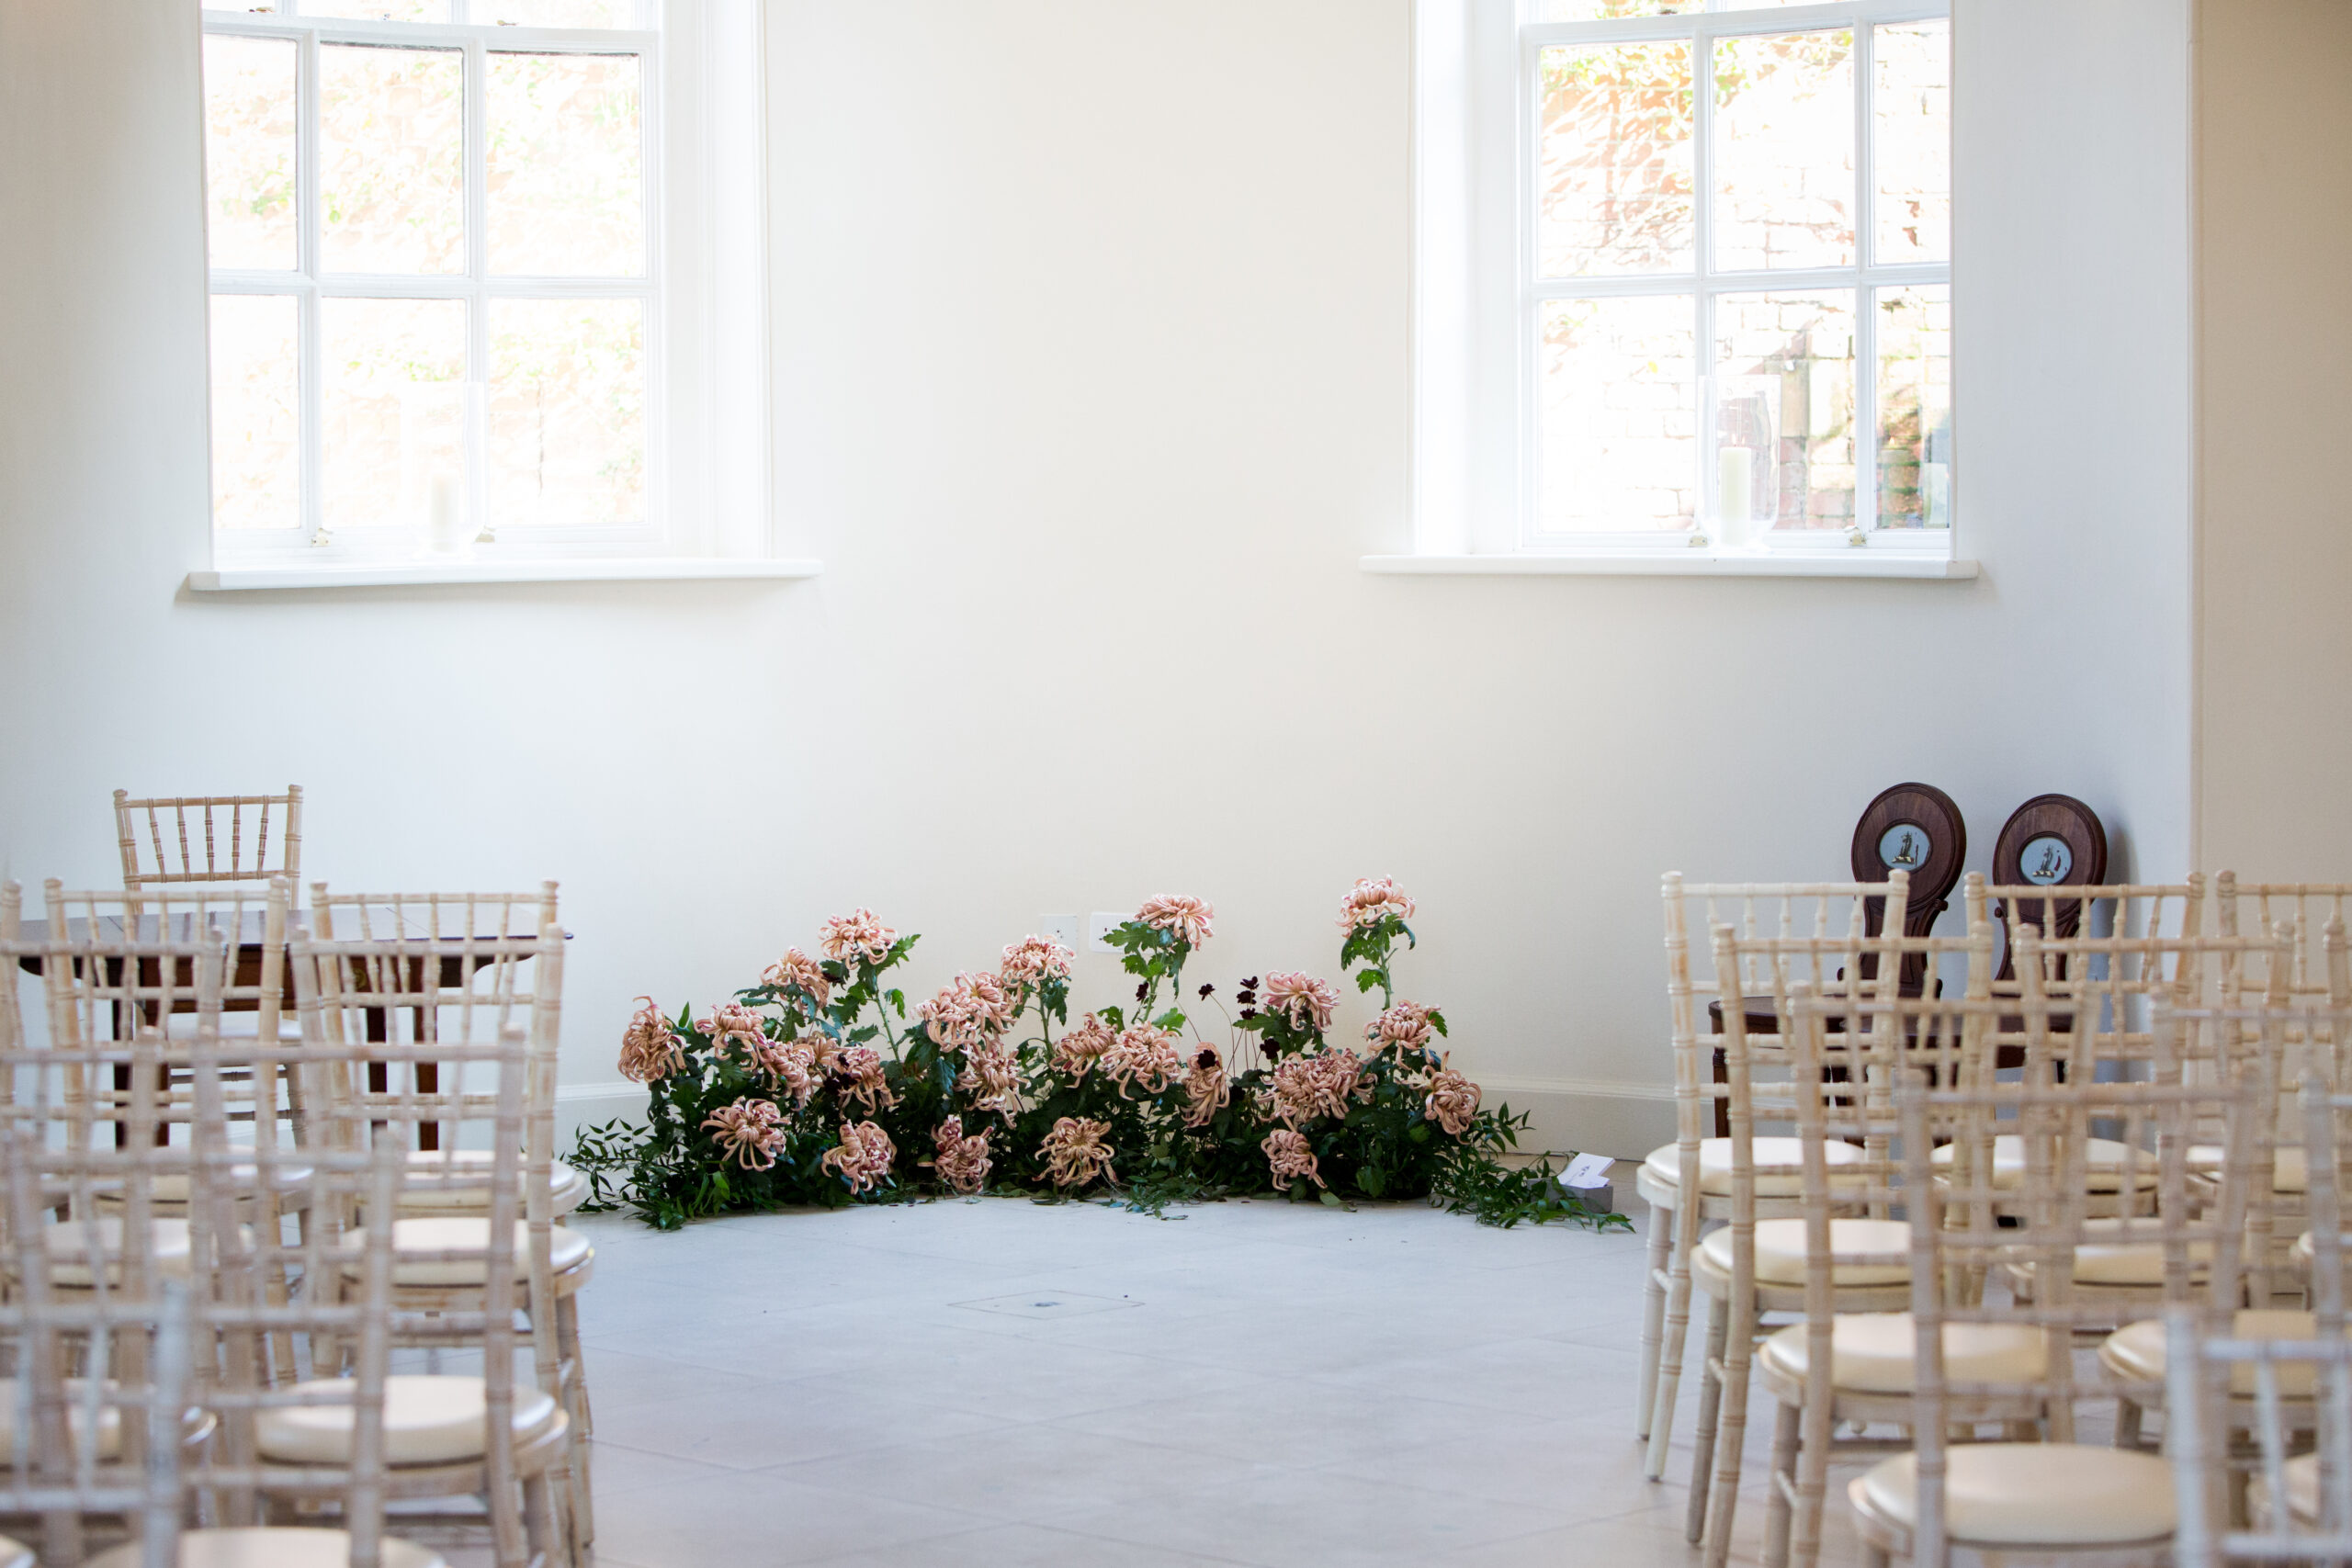 A stunning recap of luxury Whitchurch Wrexham wedding venue Iscoyd Park at their October Open Day photographed by Helen Baly